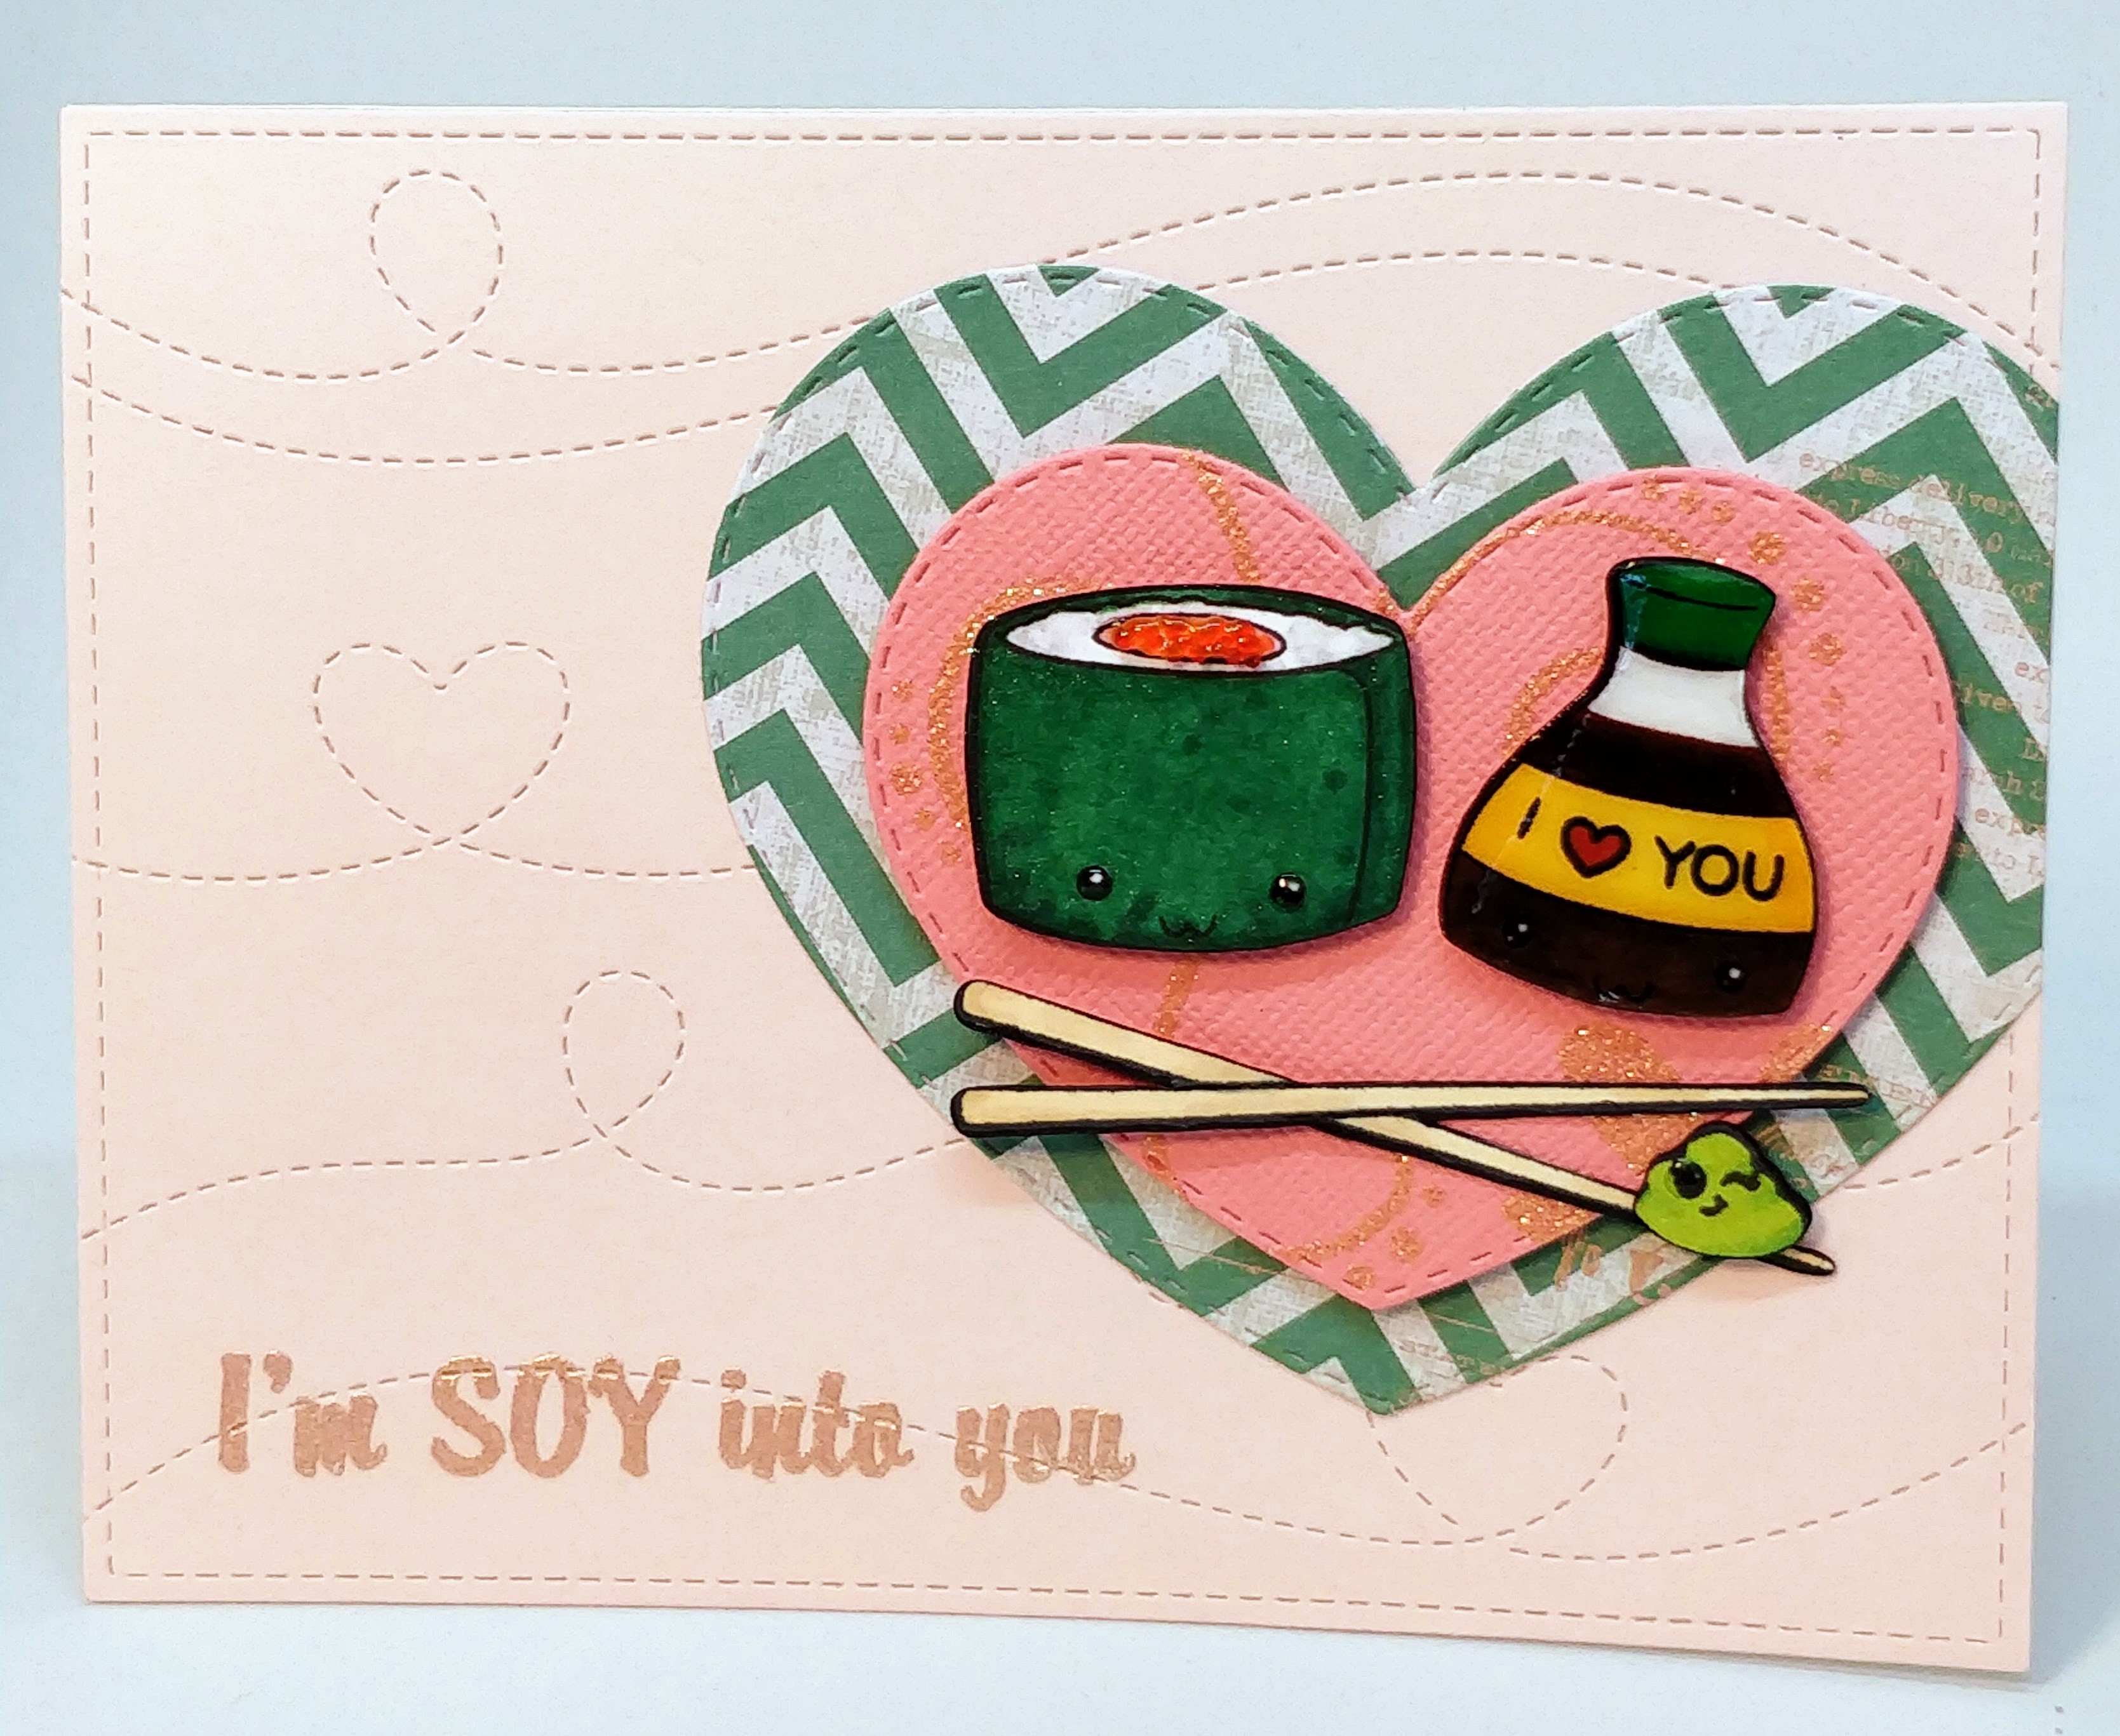 I’m Soy Into You